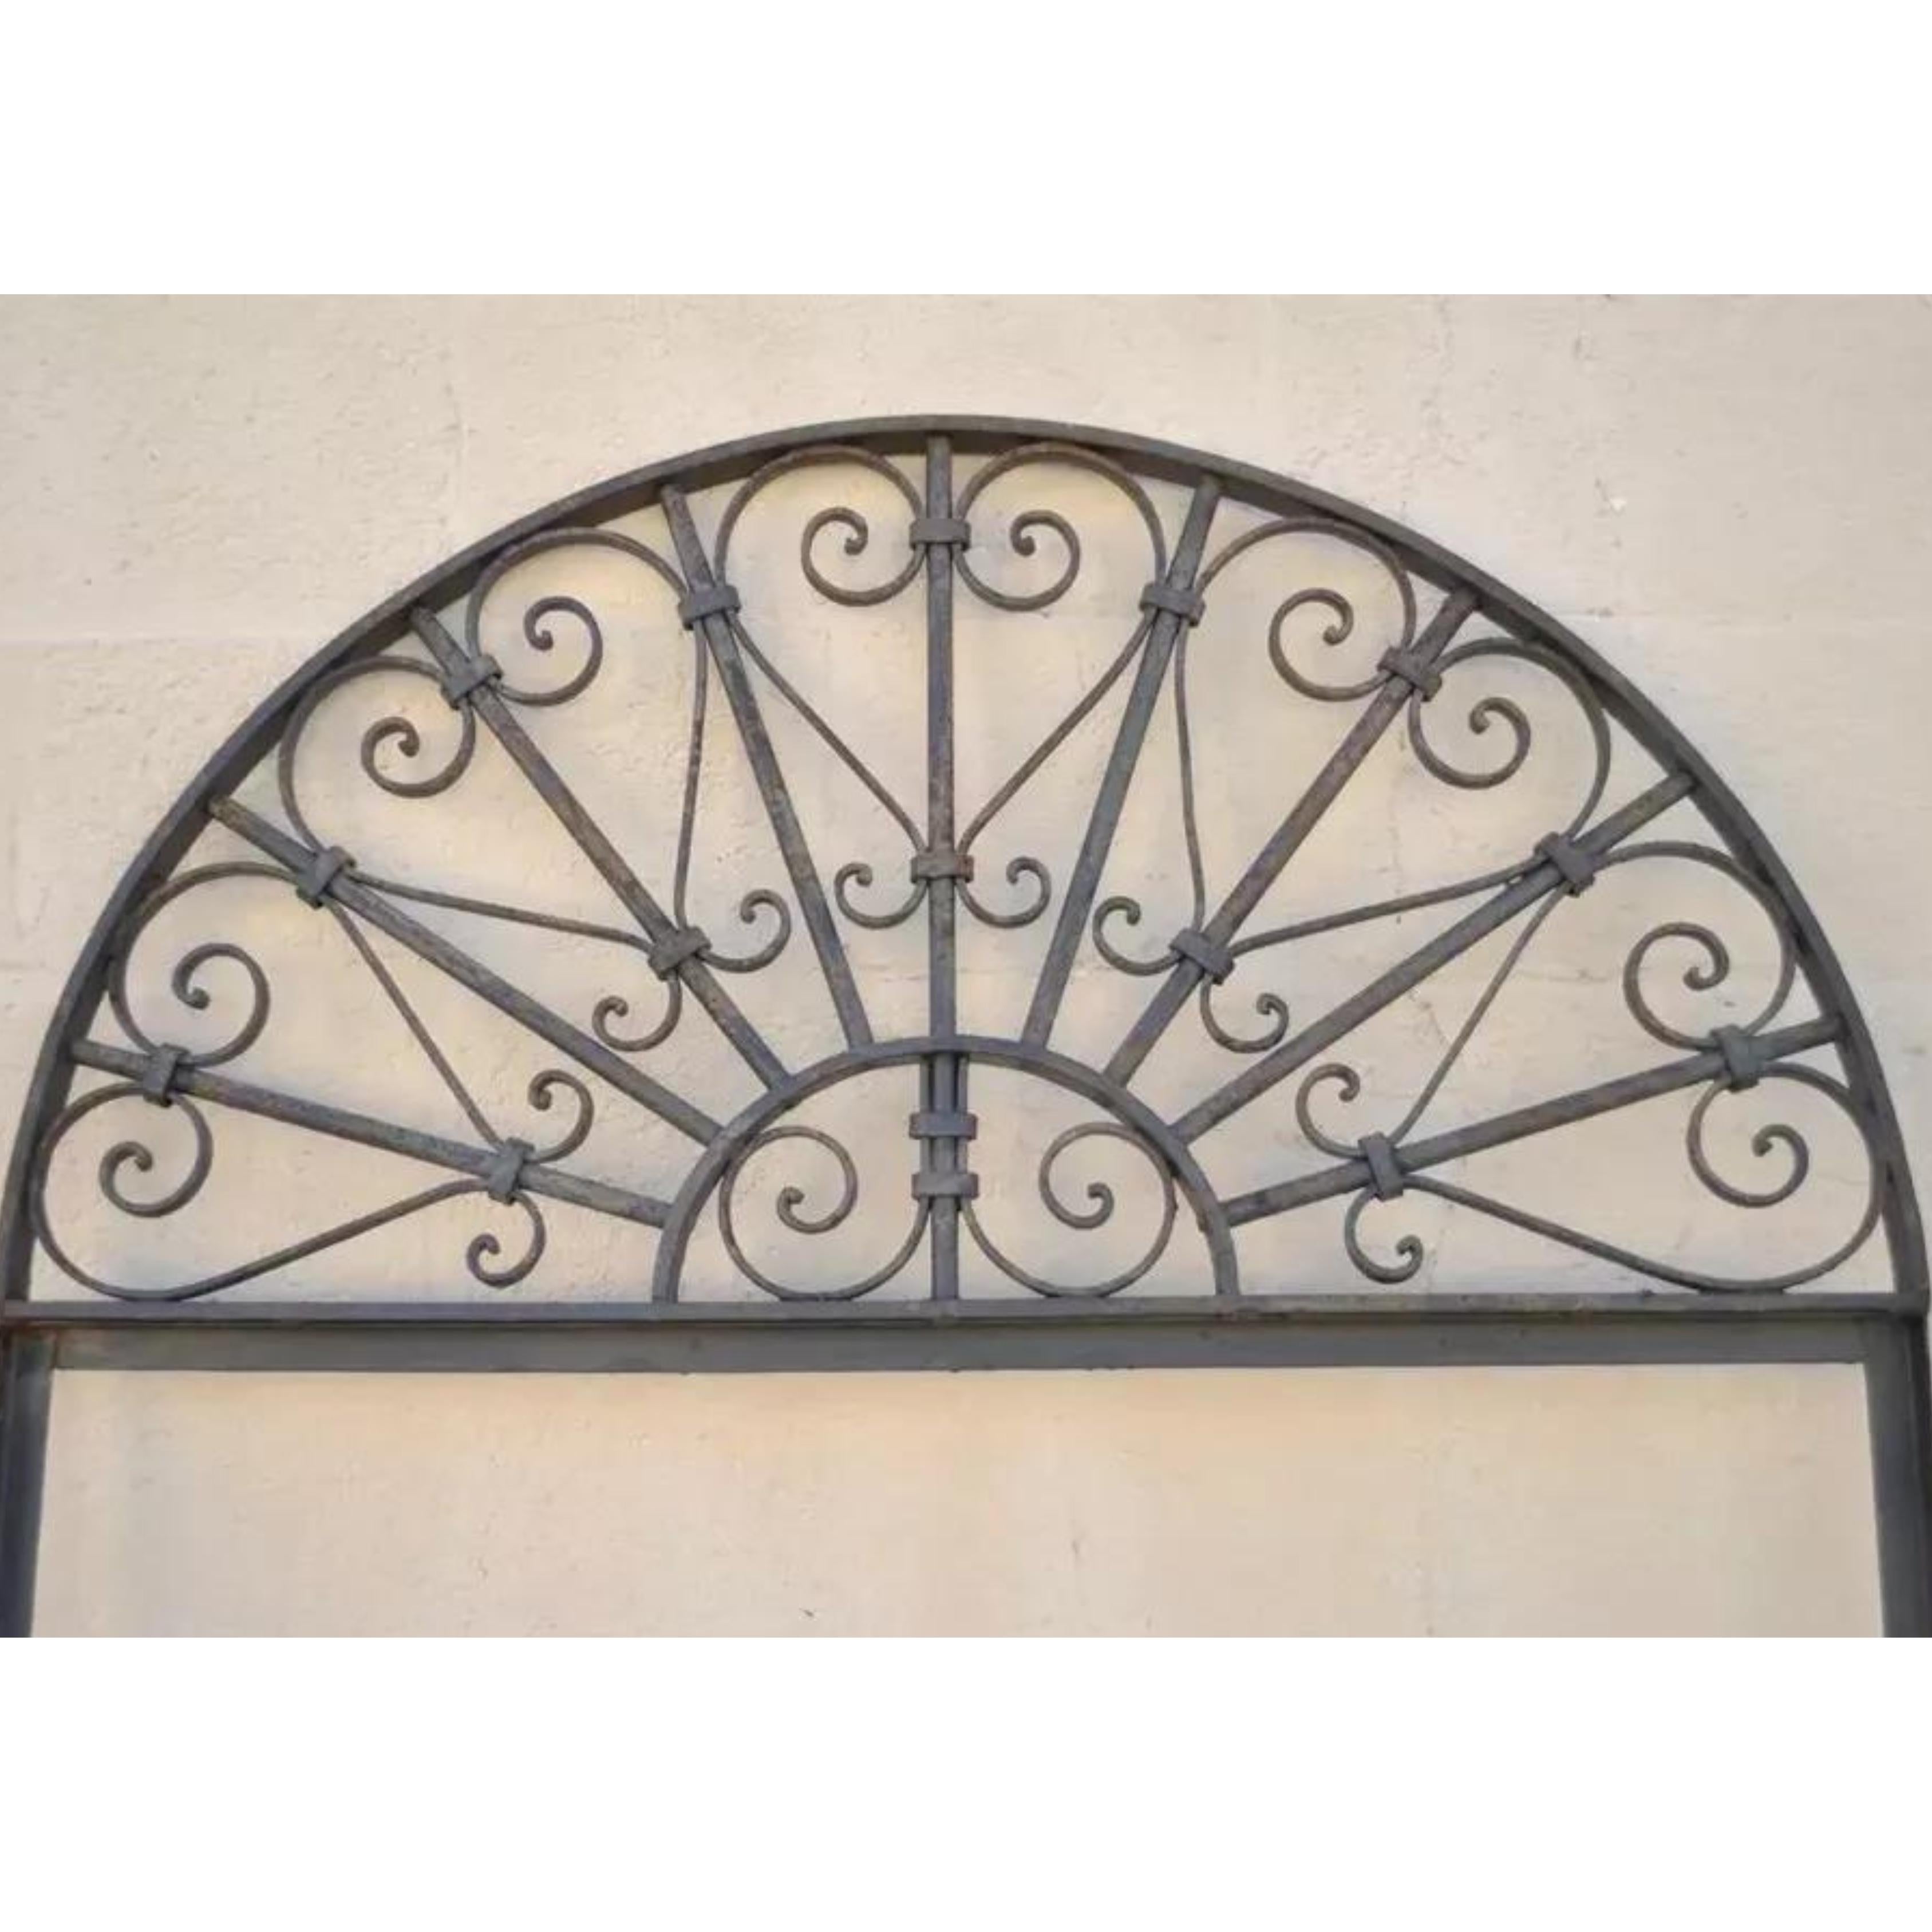 Vintage Wrought Iron Arch Top 8' Full Length Floor Mirror Frame Garden Element (C). Item features a handmade frame with ornate scrolling details. Great to use as a tall full length mirror. Listing does not include glass or hardware. Buyer